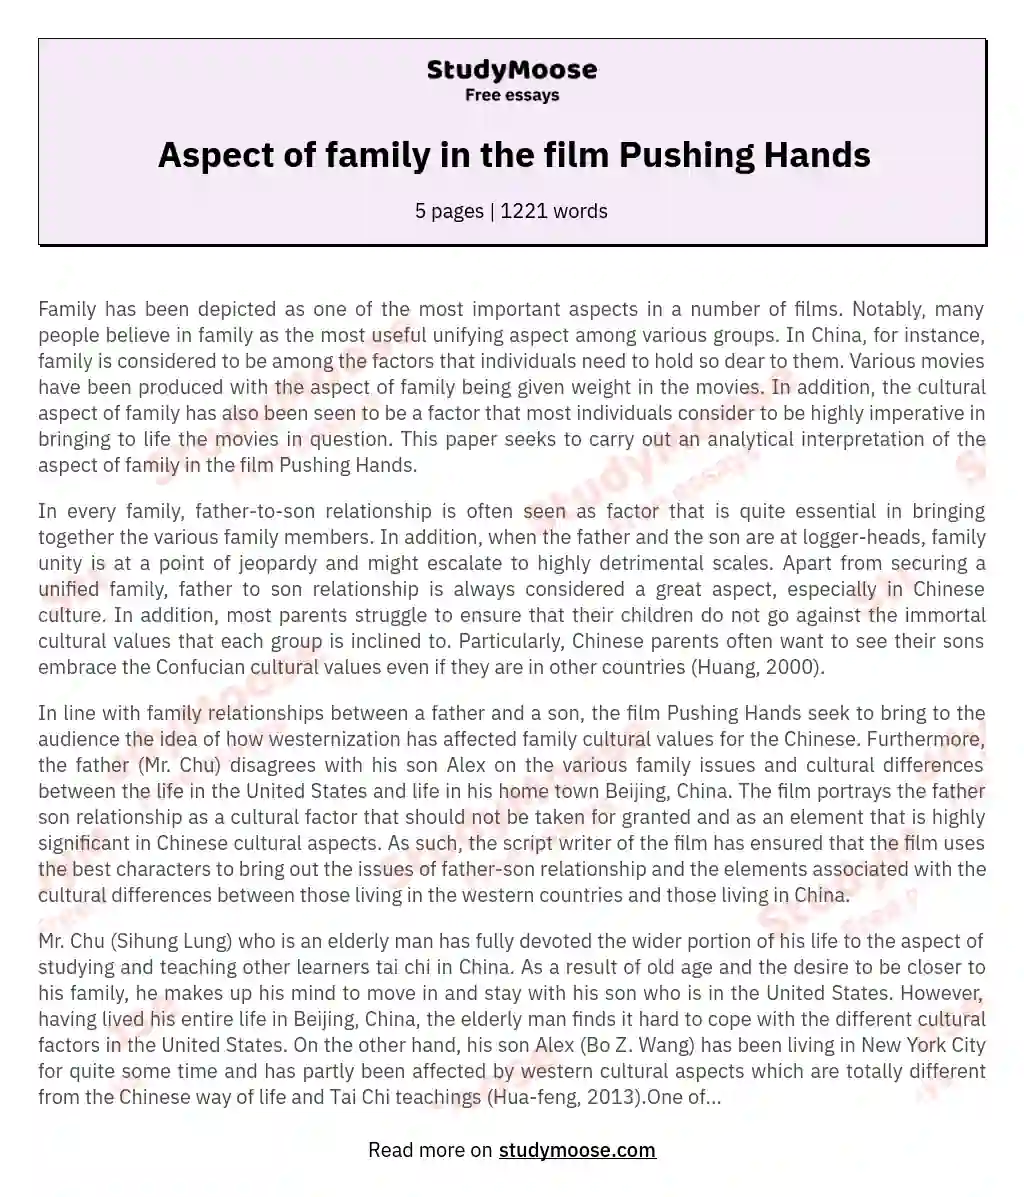 Aspect of family in the film Pushing Hands